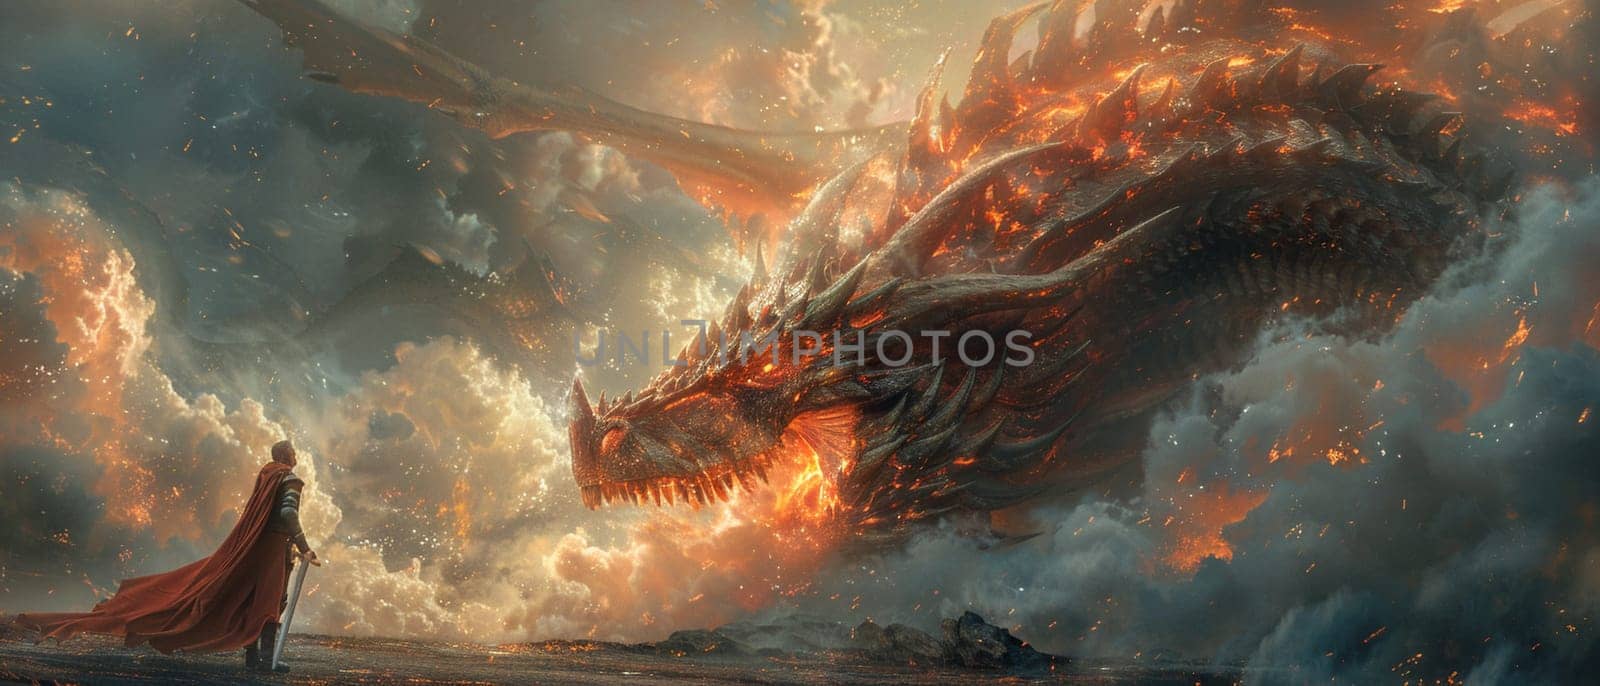 Dragon and knight facing off in a dramatic showdown, illustrated with intense colors and action.